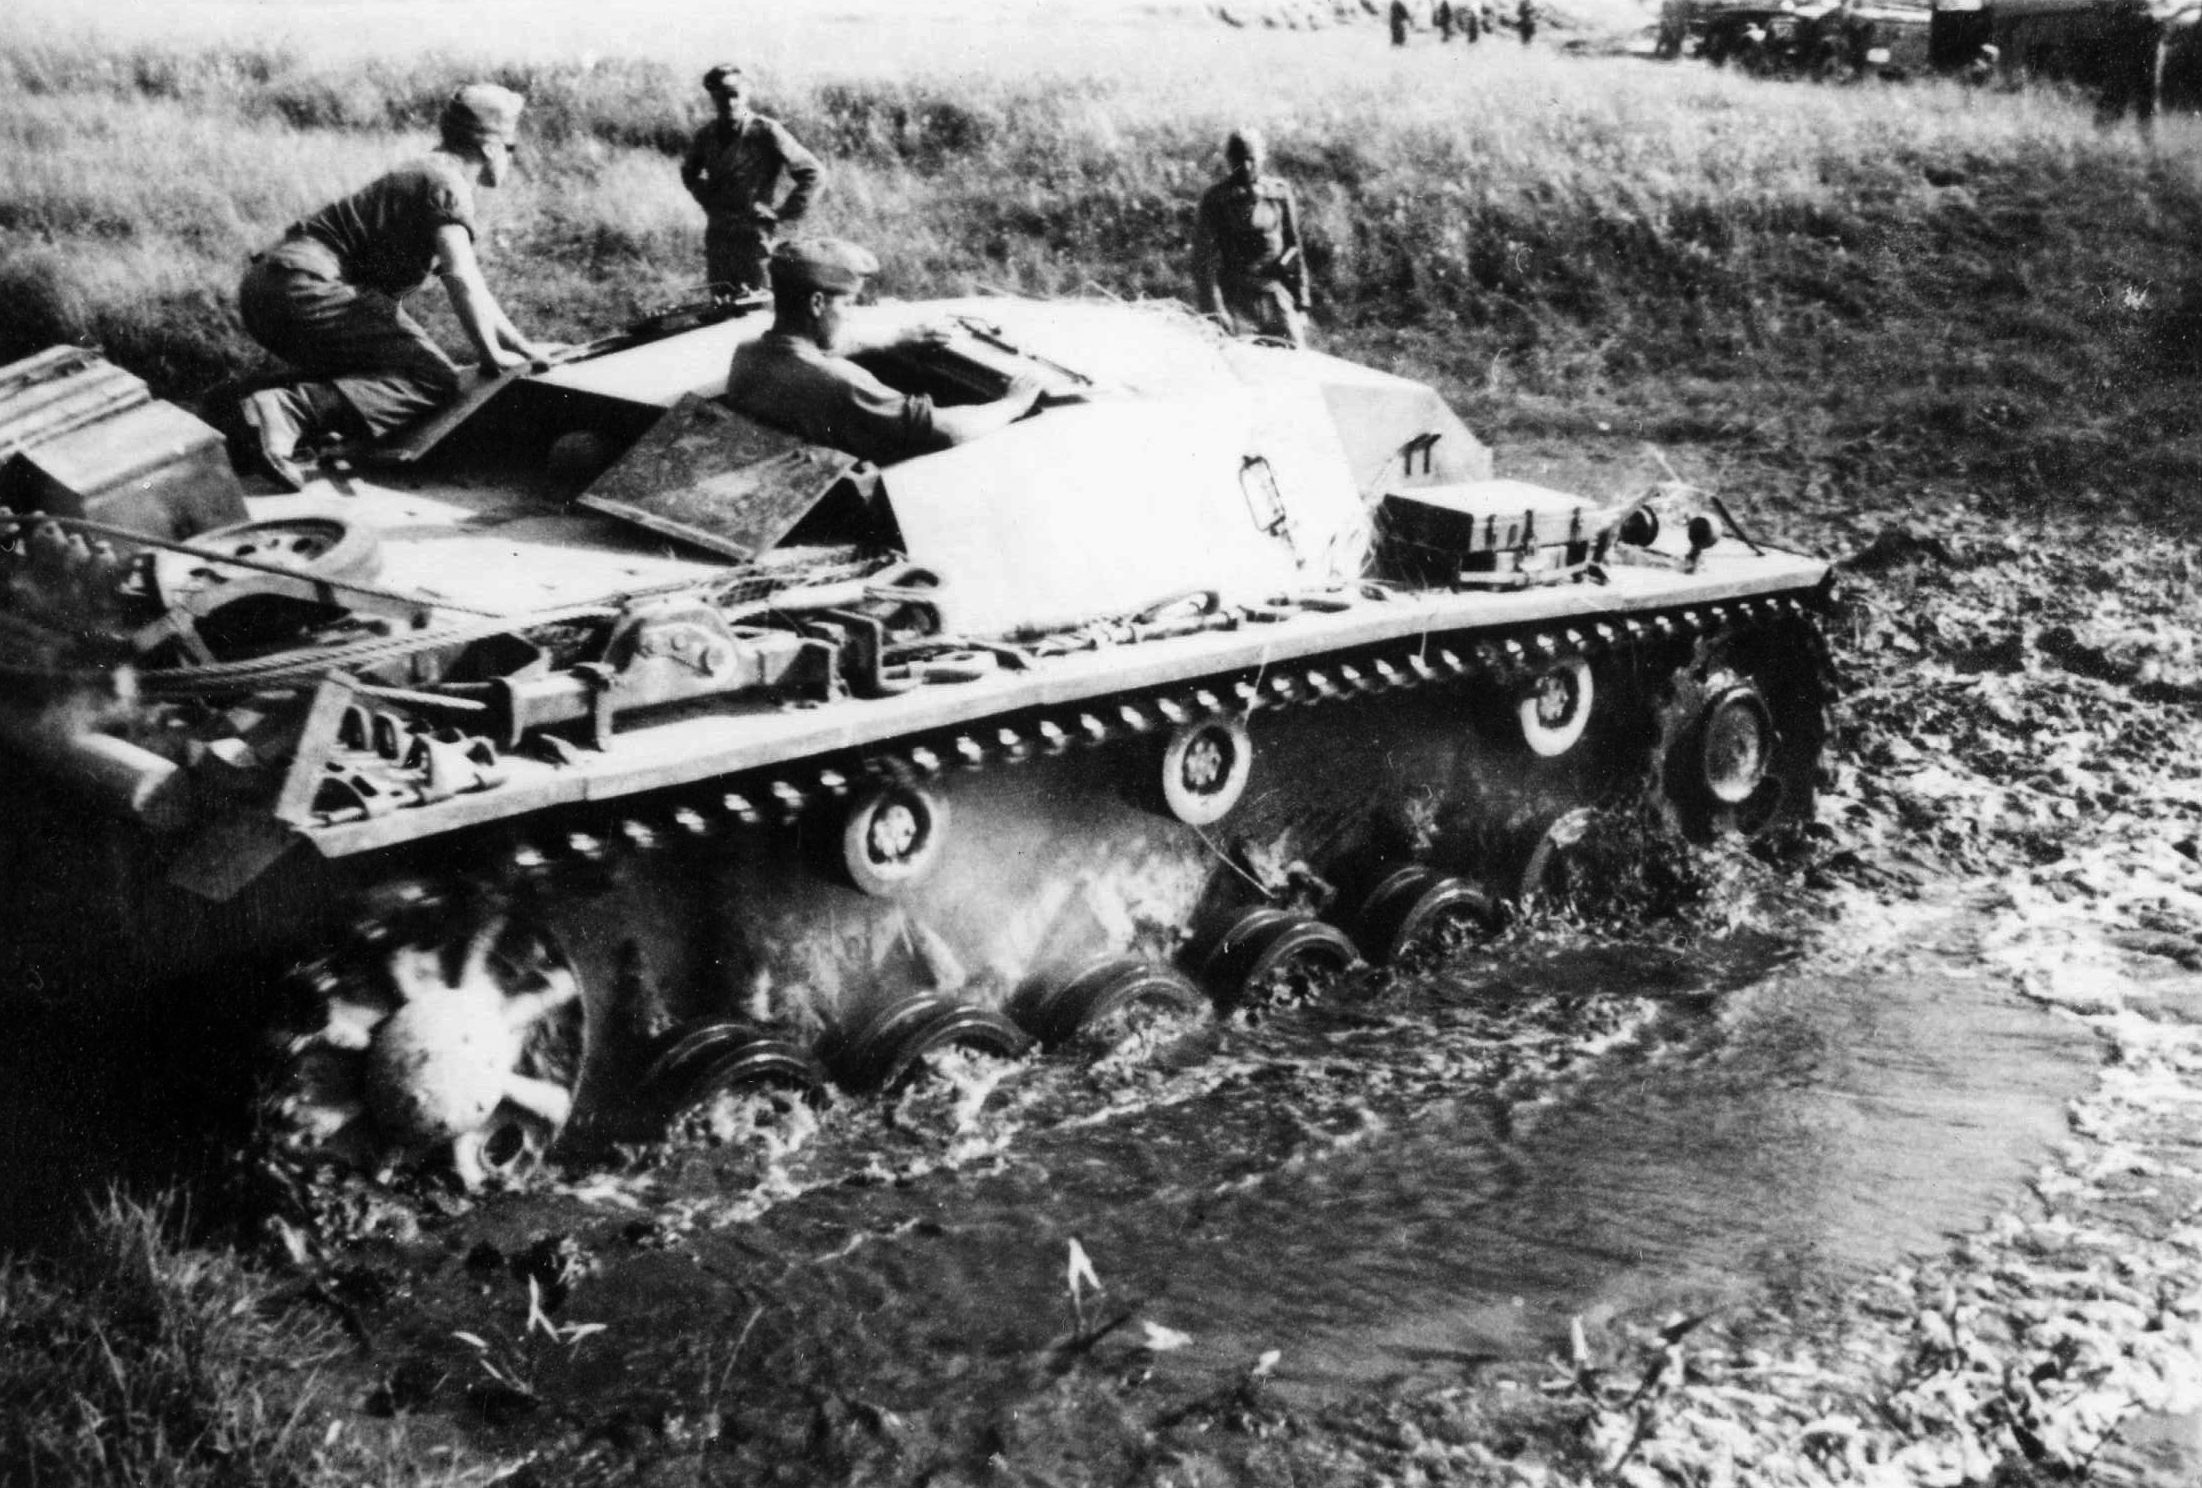 A Soviet reconnaissance tank slogs through thick mud and marshy terrain in search of forward German positions. At Tikhvin, the Red Army rallied to deny the Germans the city of Leningrad.